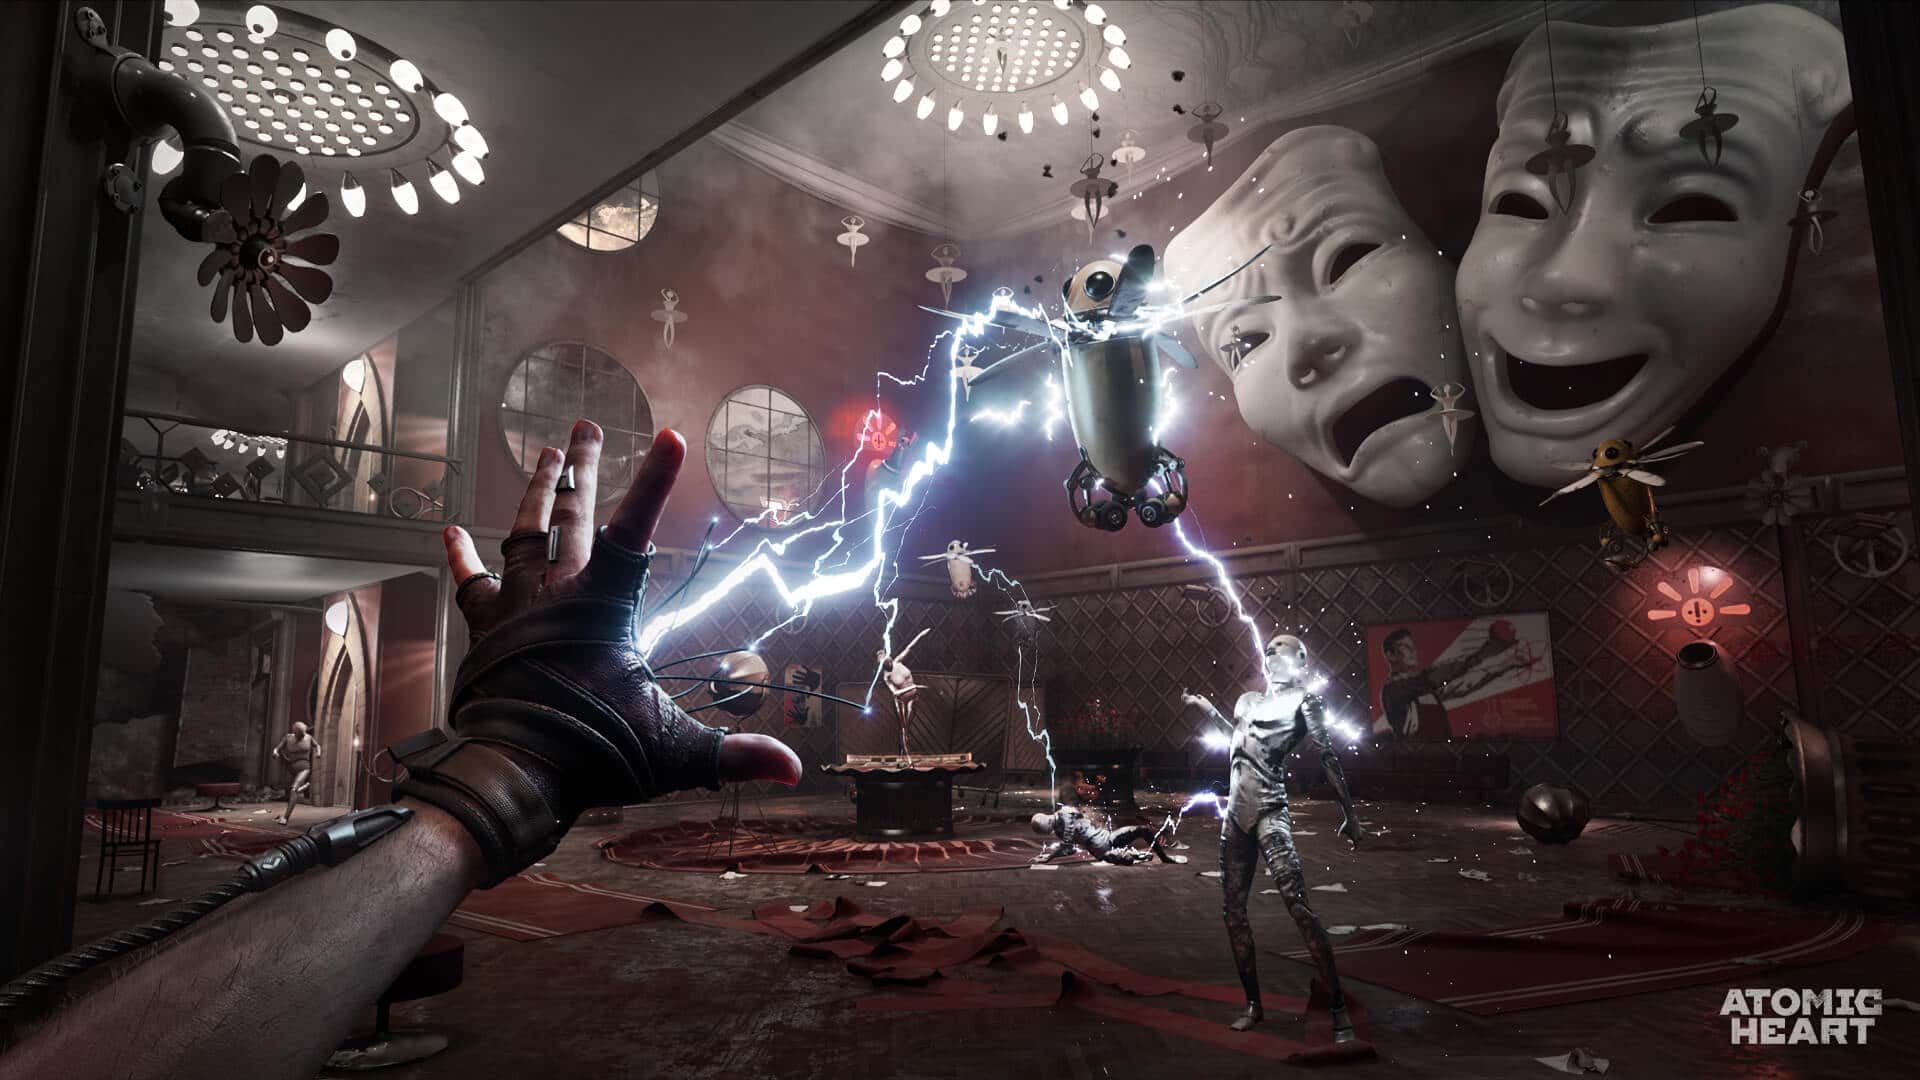 An image showing the electroshock powers and combat in Atomic Heart